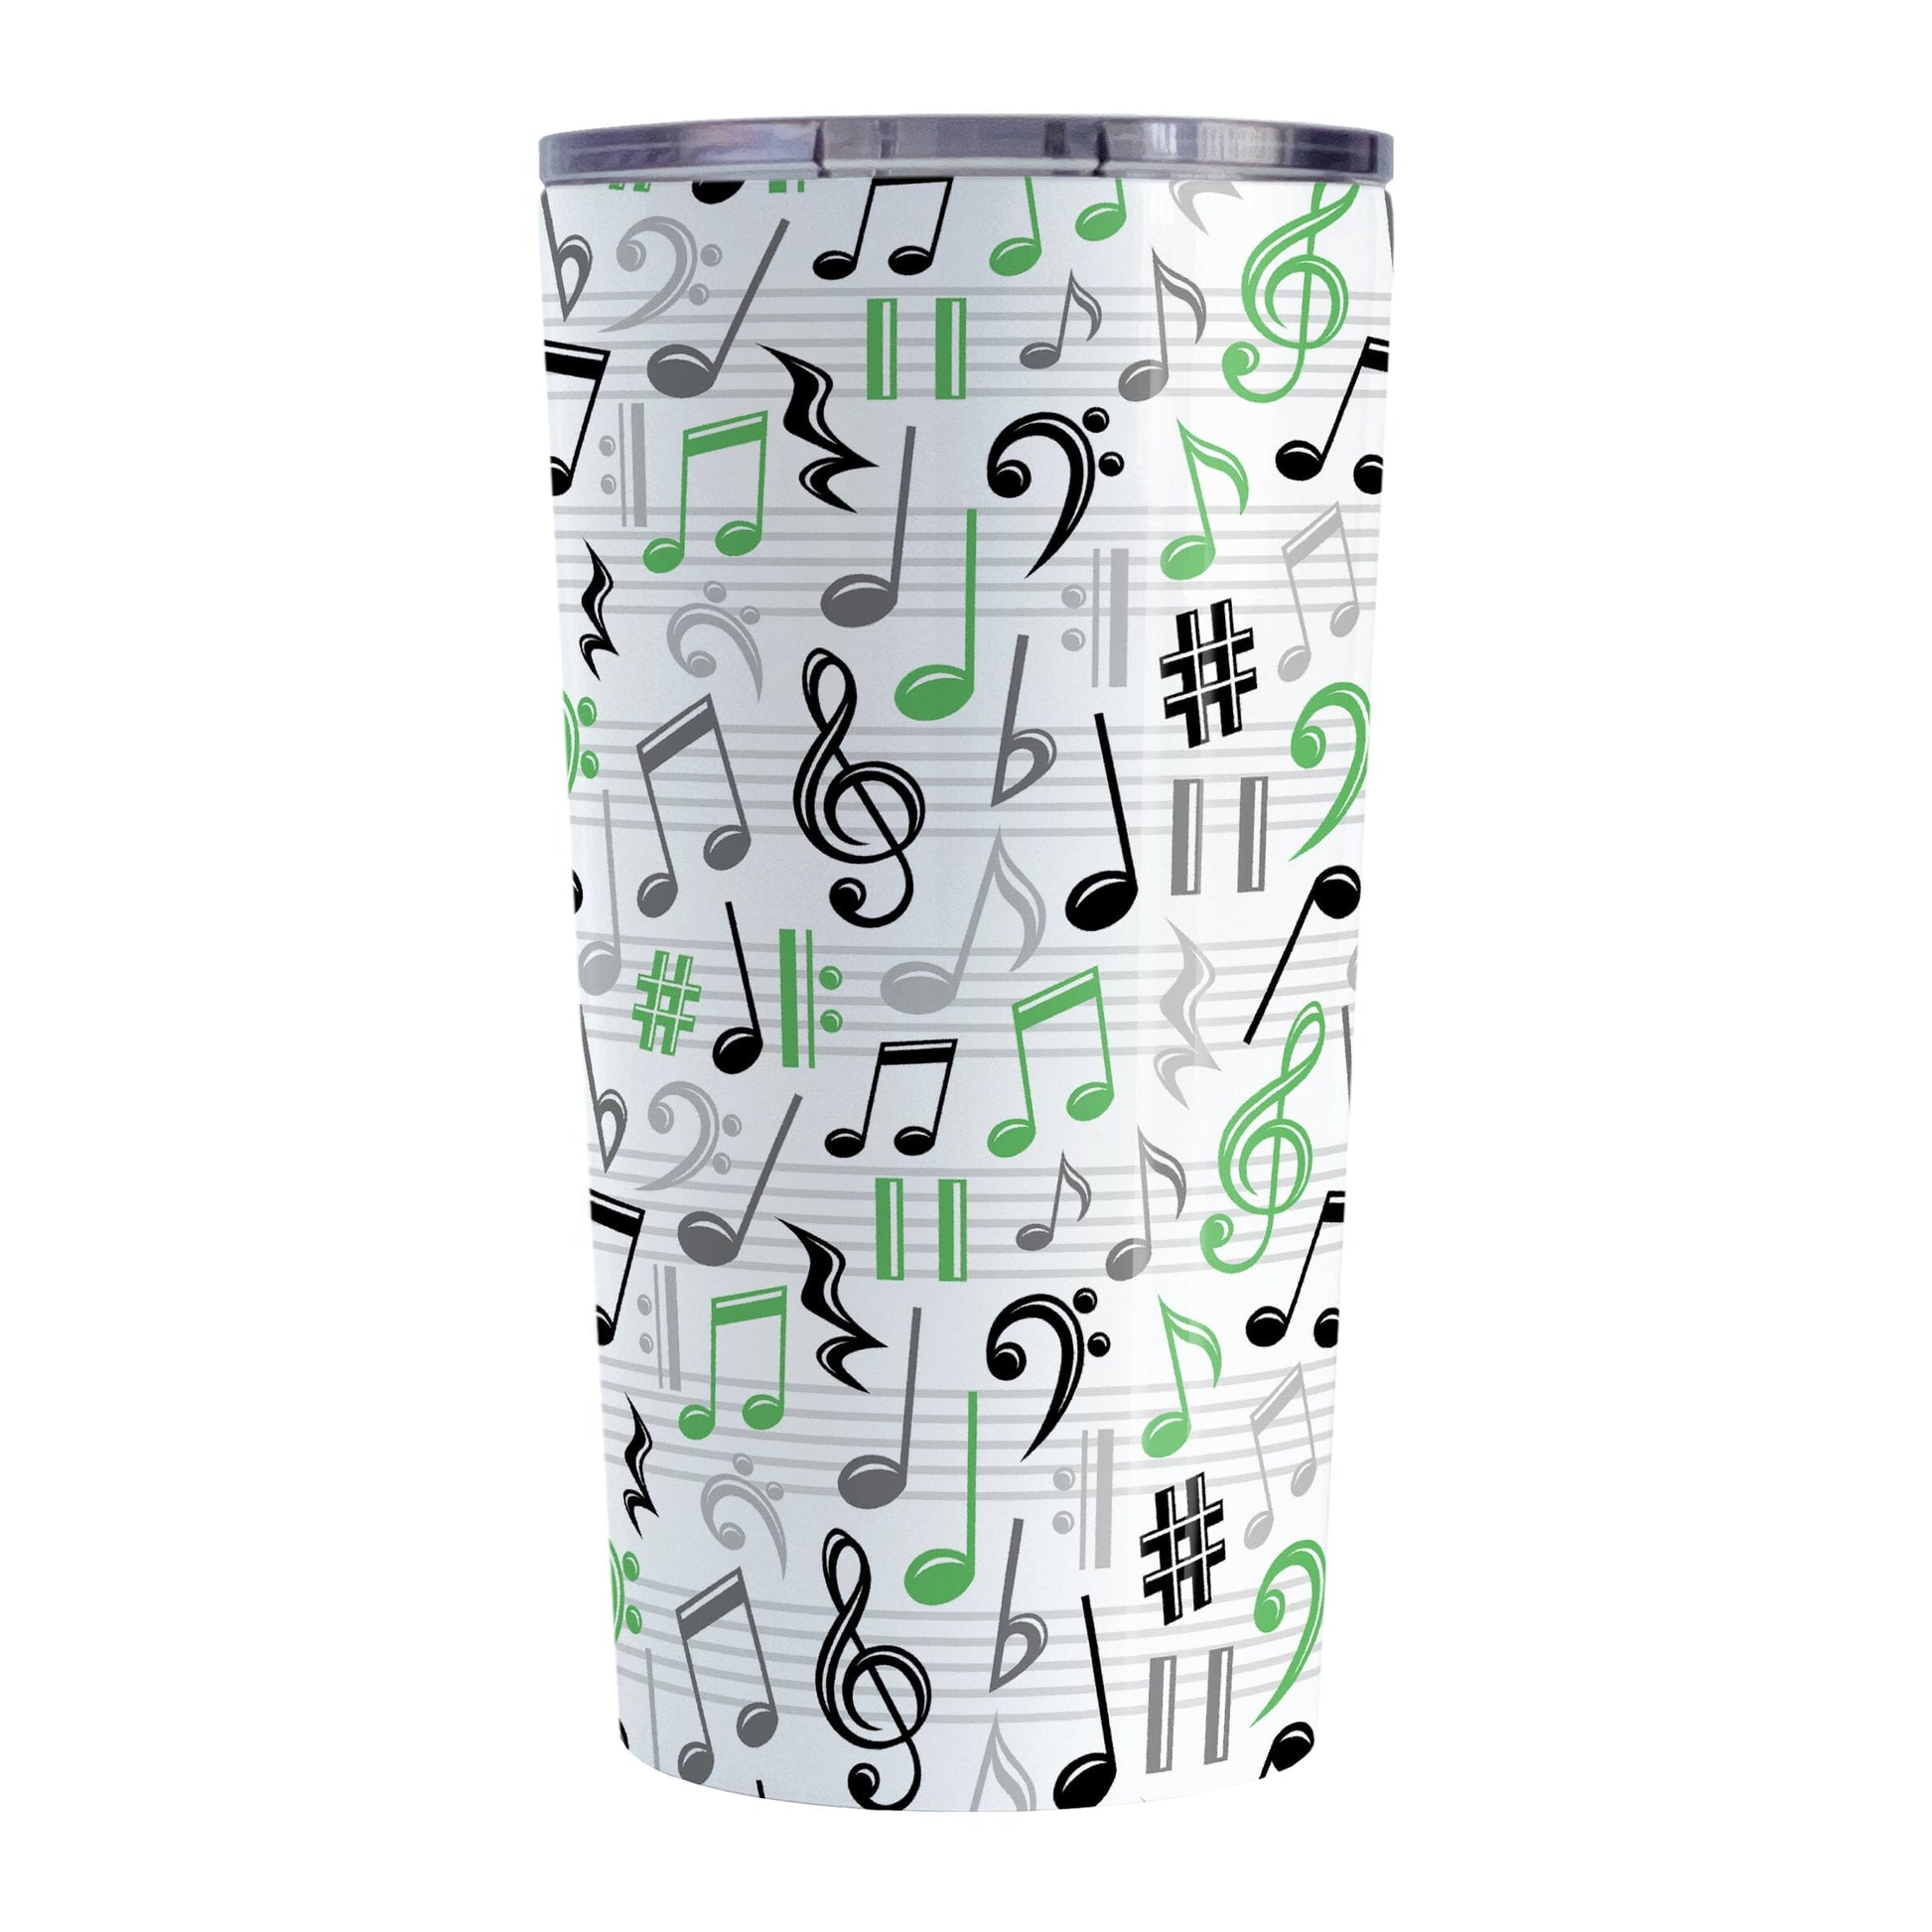 Green Music Notes Pattern Tumbler Cup (20oz) at Amy's Coffee Mugs. A stainless steel tumbler cup designed with music notes and symbols in green, black, and gray in a pattern that wraps around the cup.